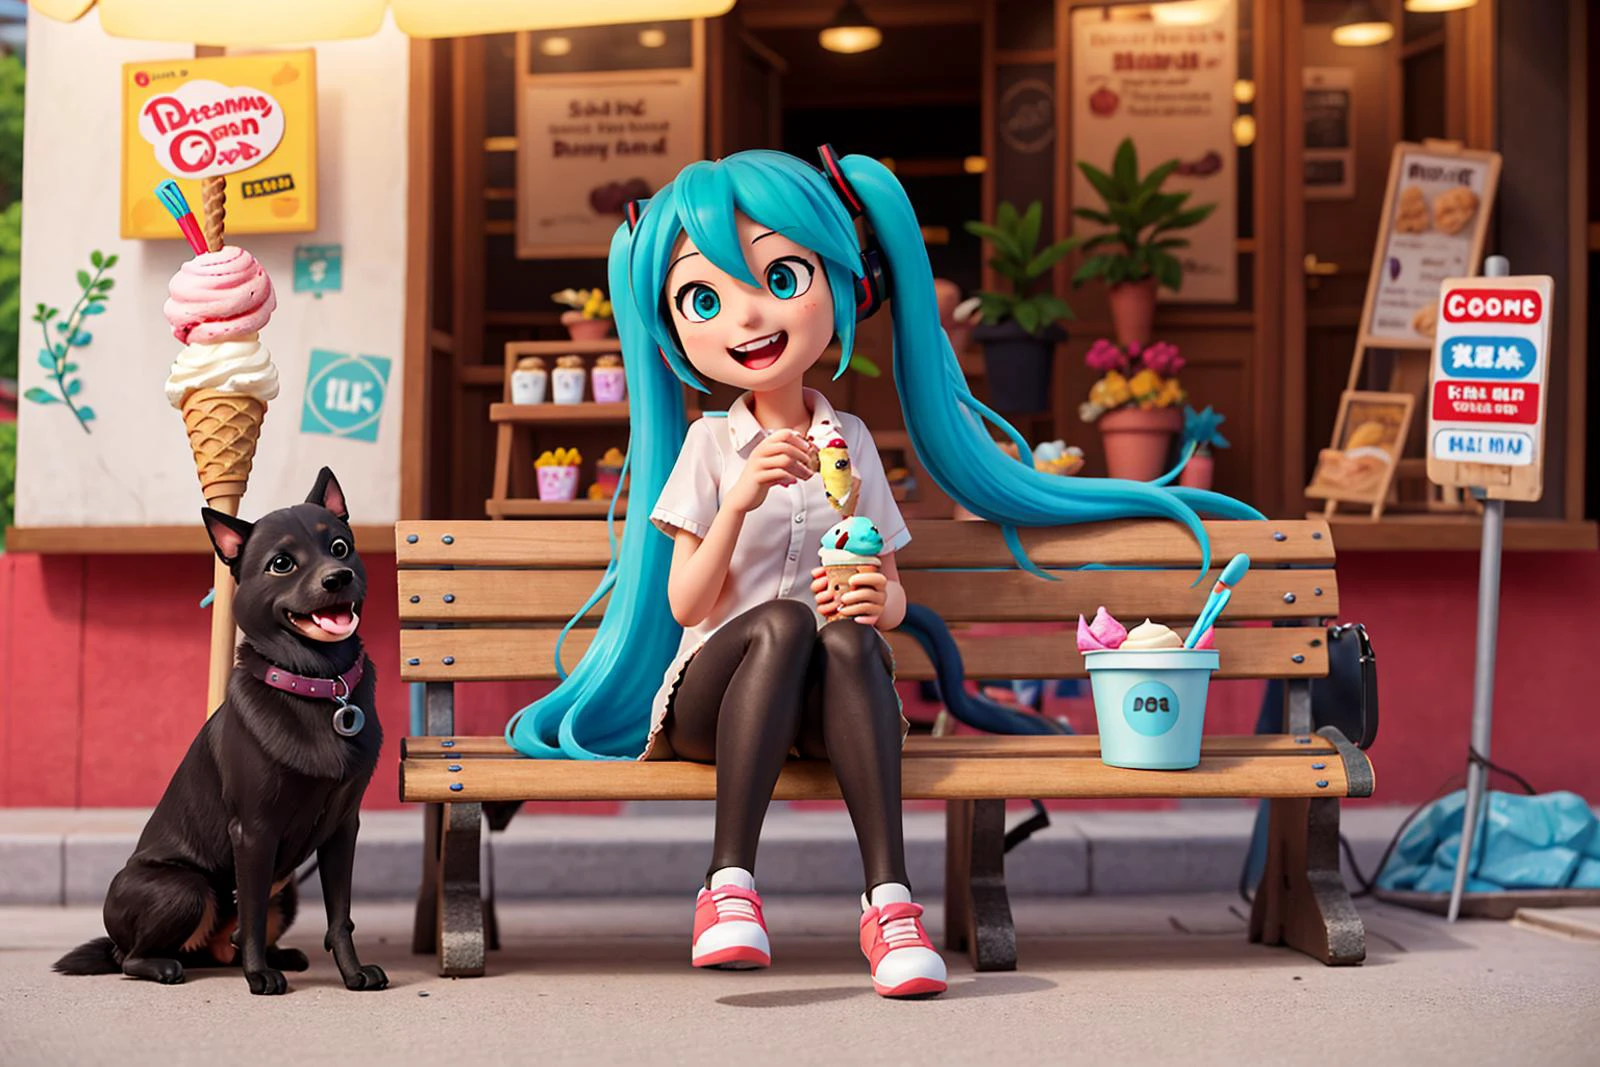 absurdres, best quality, ultra detailed, in august, perfect skinny body, perfect body,
hatsune miku is sitting on a bench in front of the ice cream store with a black dog sign, she is happy with ice cream